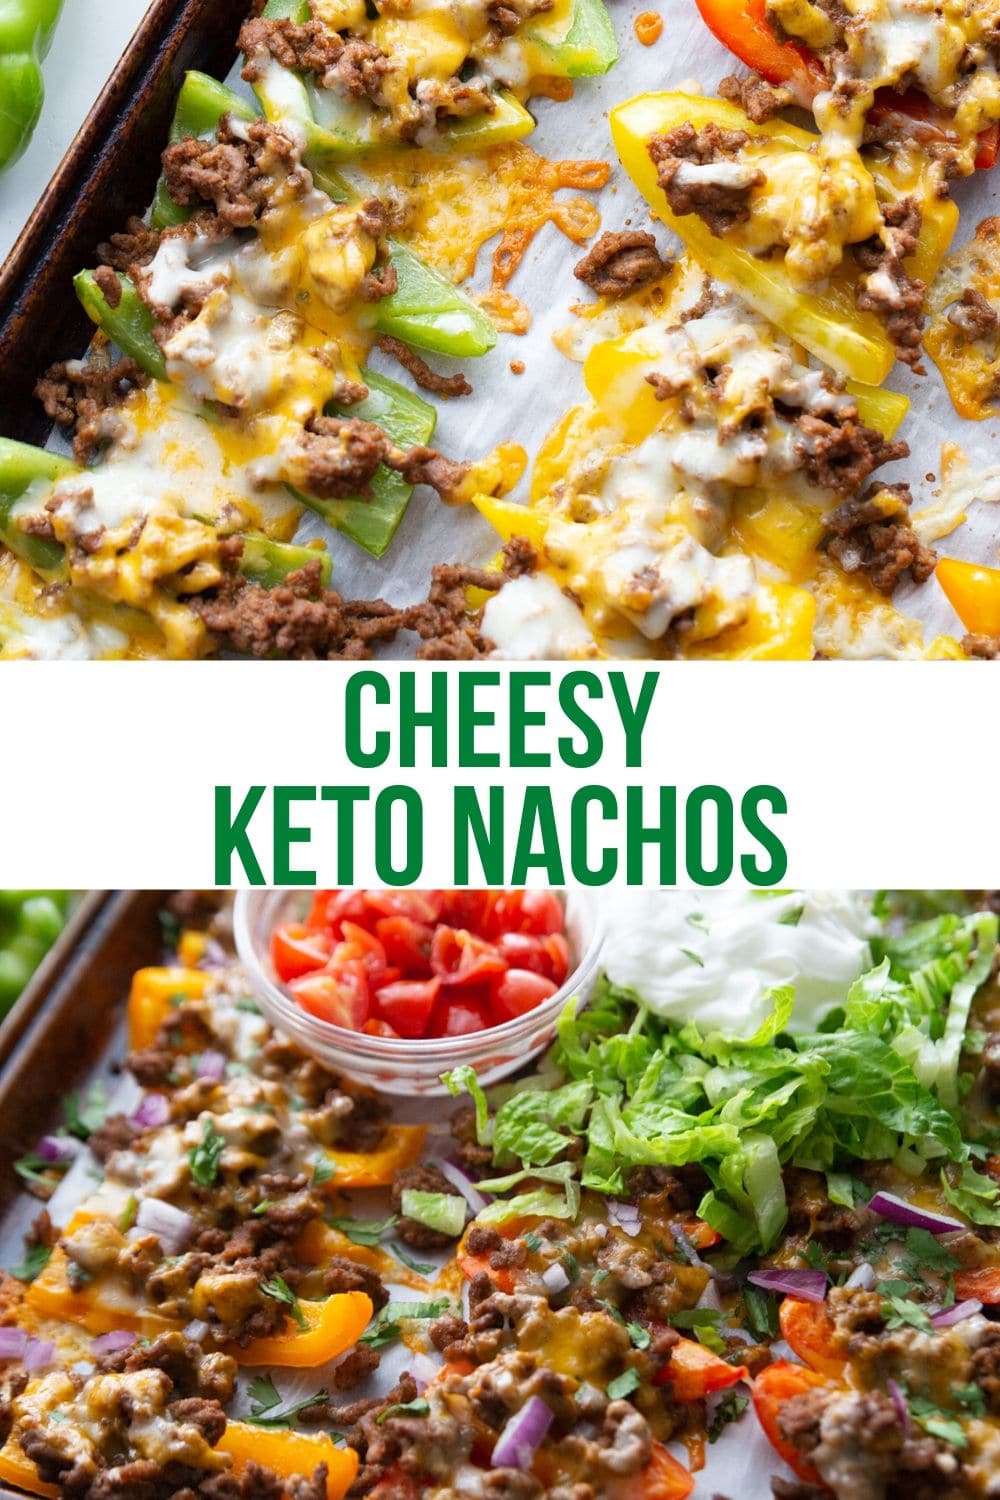 ground beef keto nachos with bell peppers and toppings on baking sheet